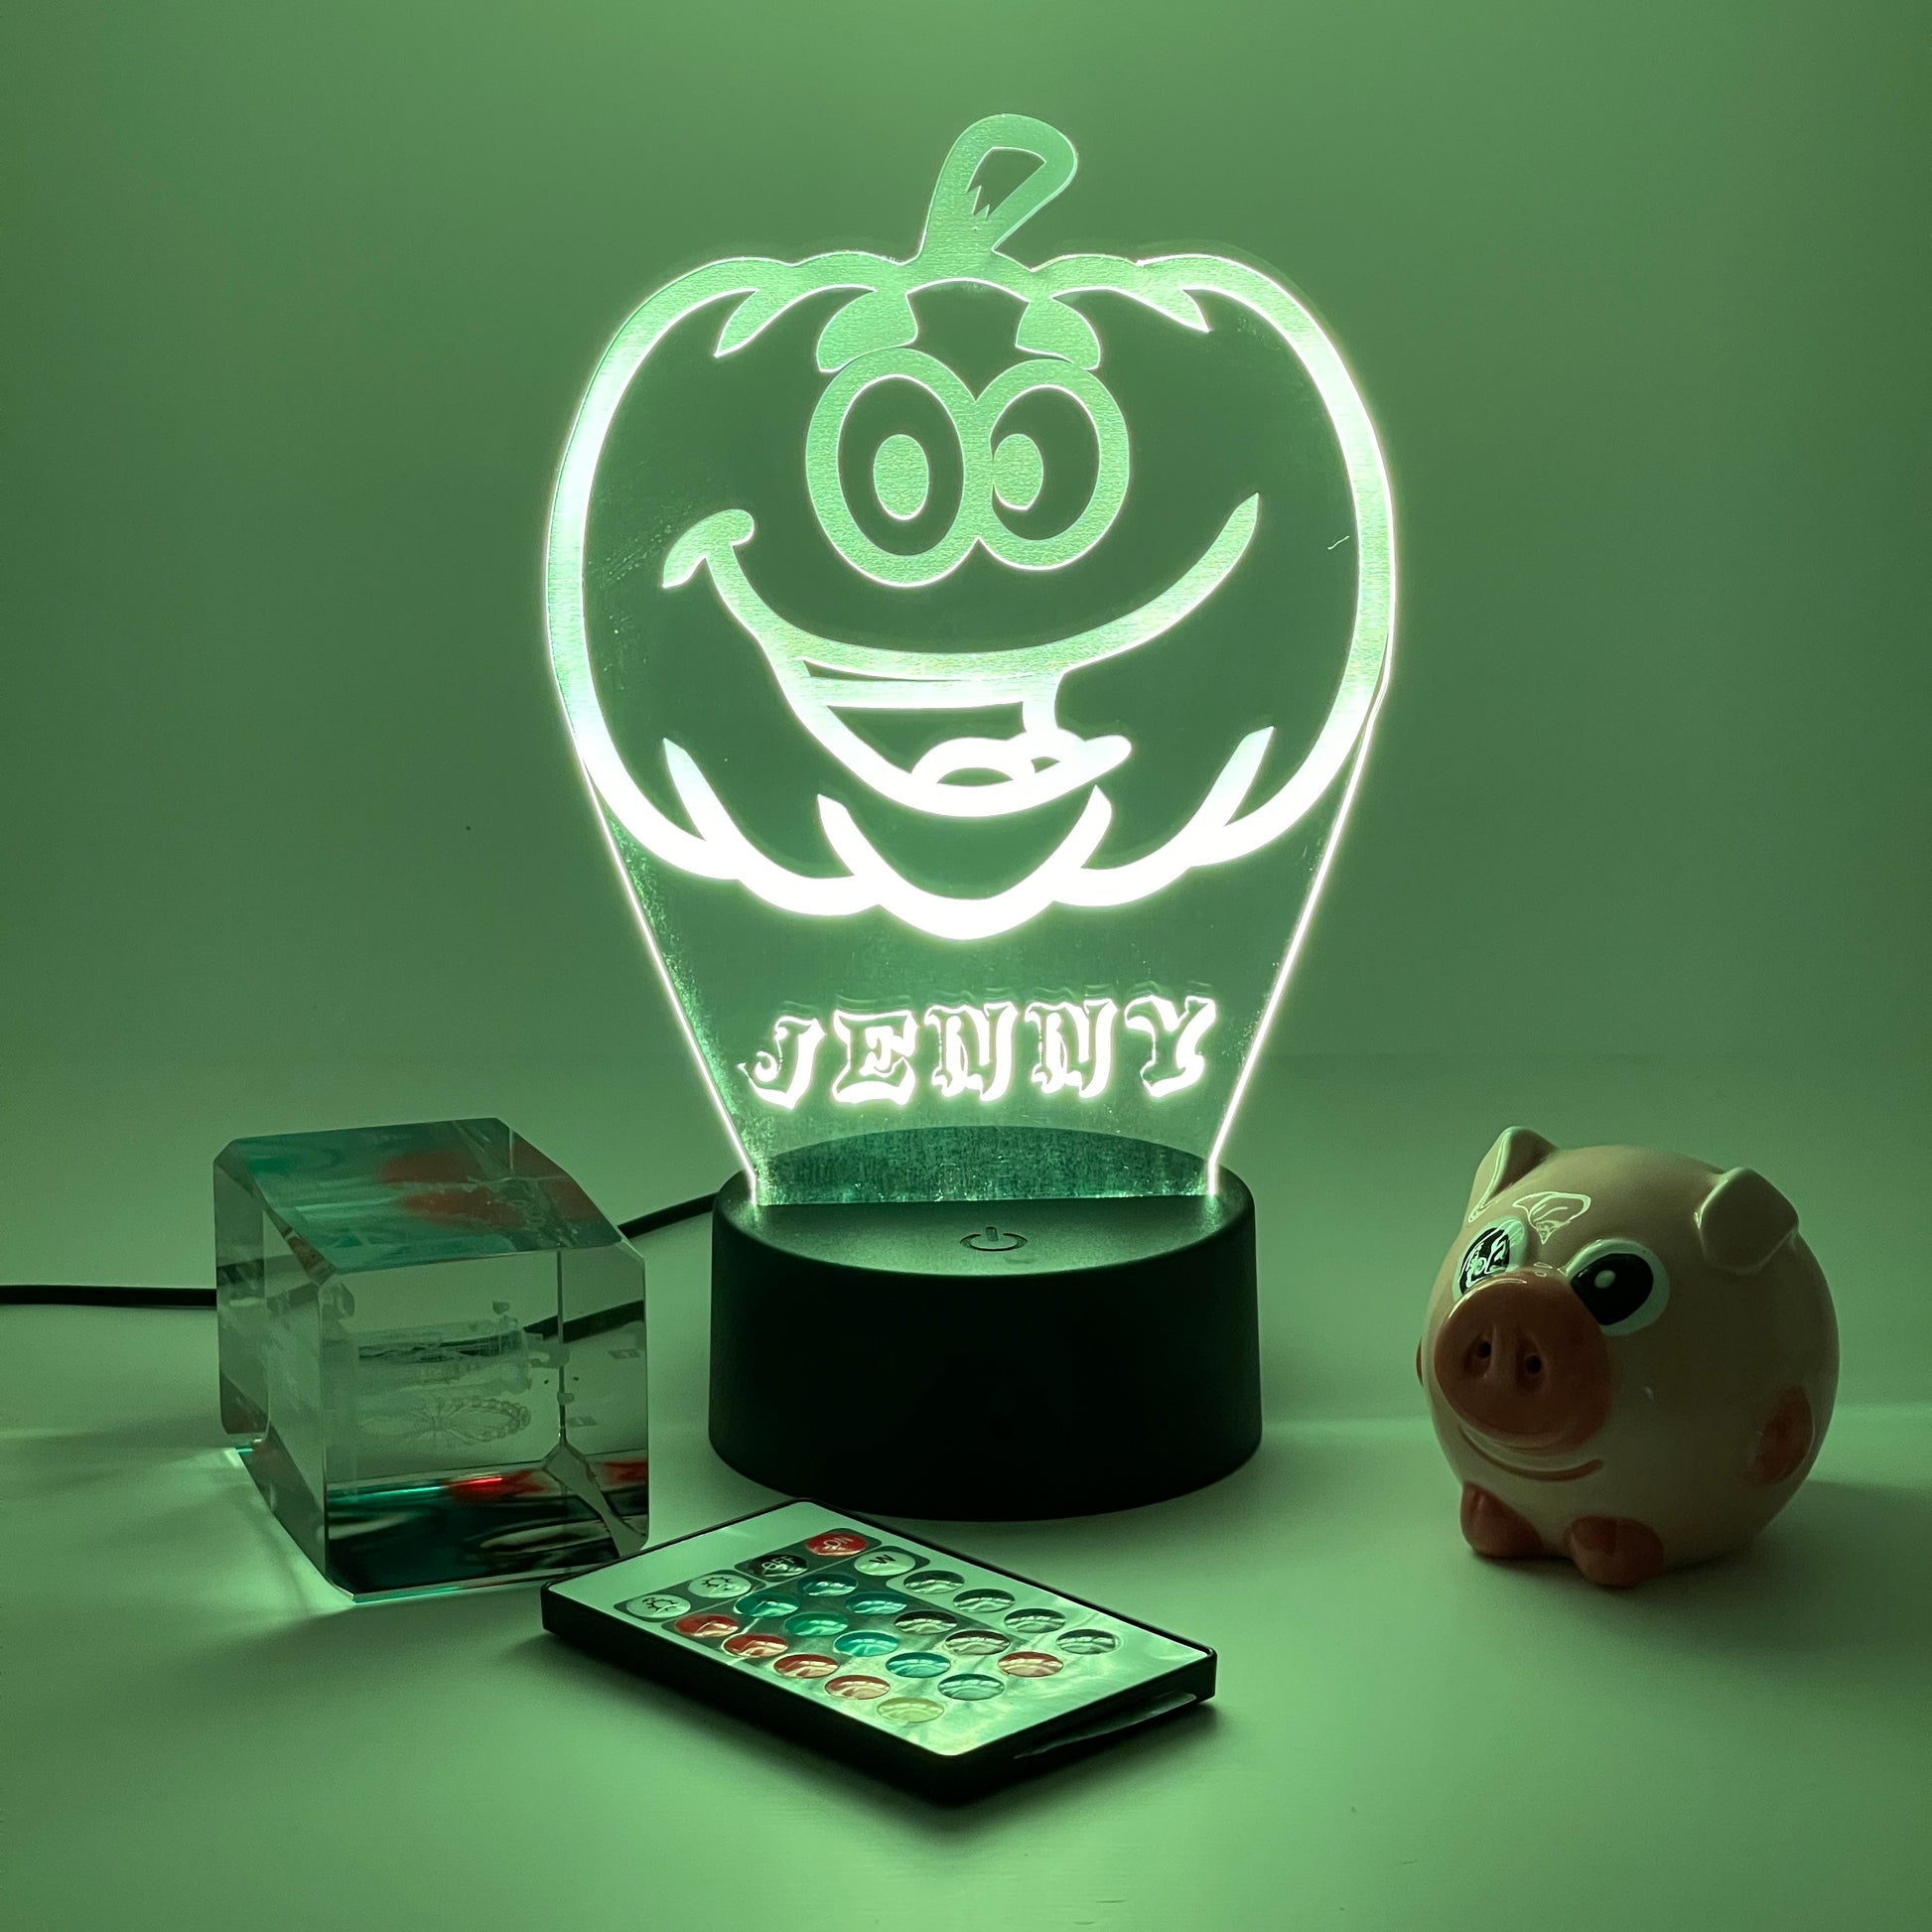 Personalized Halloween gifts pumpkin smile Night Light